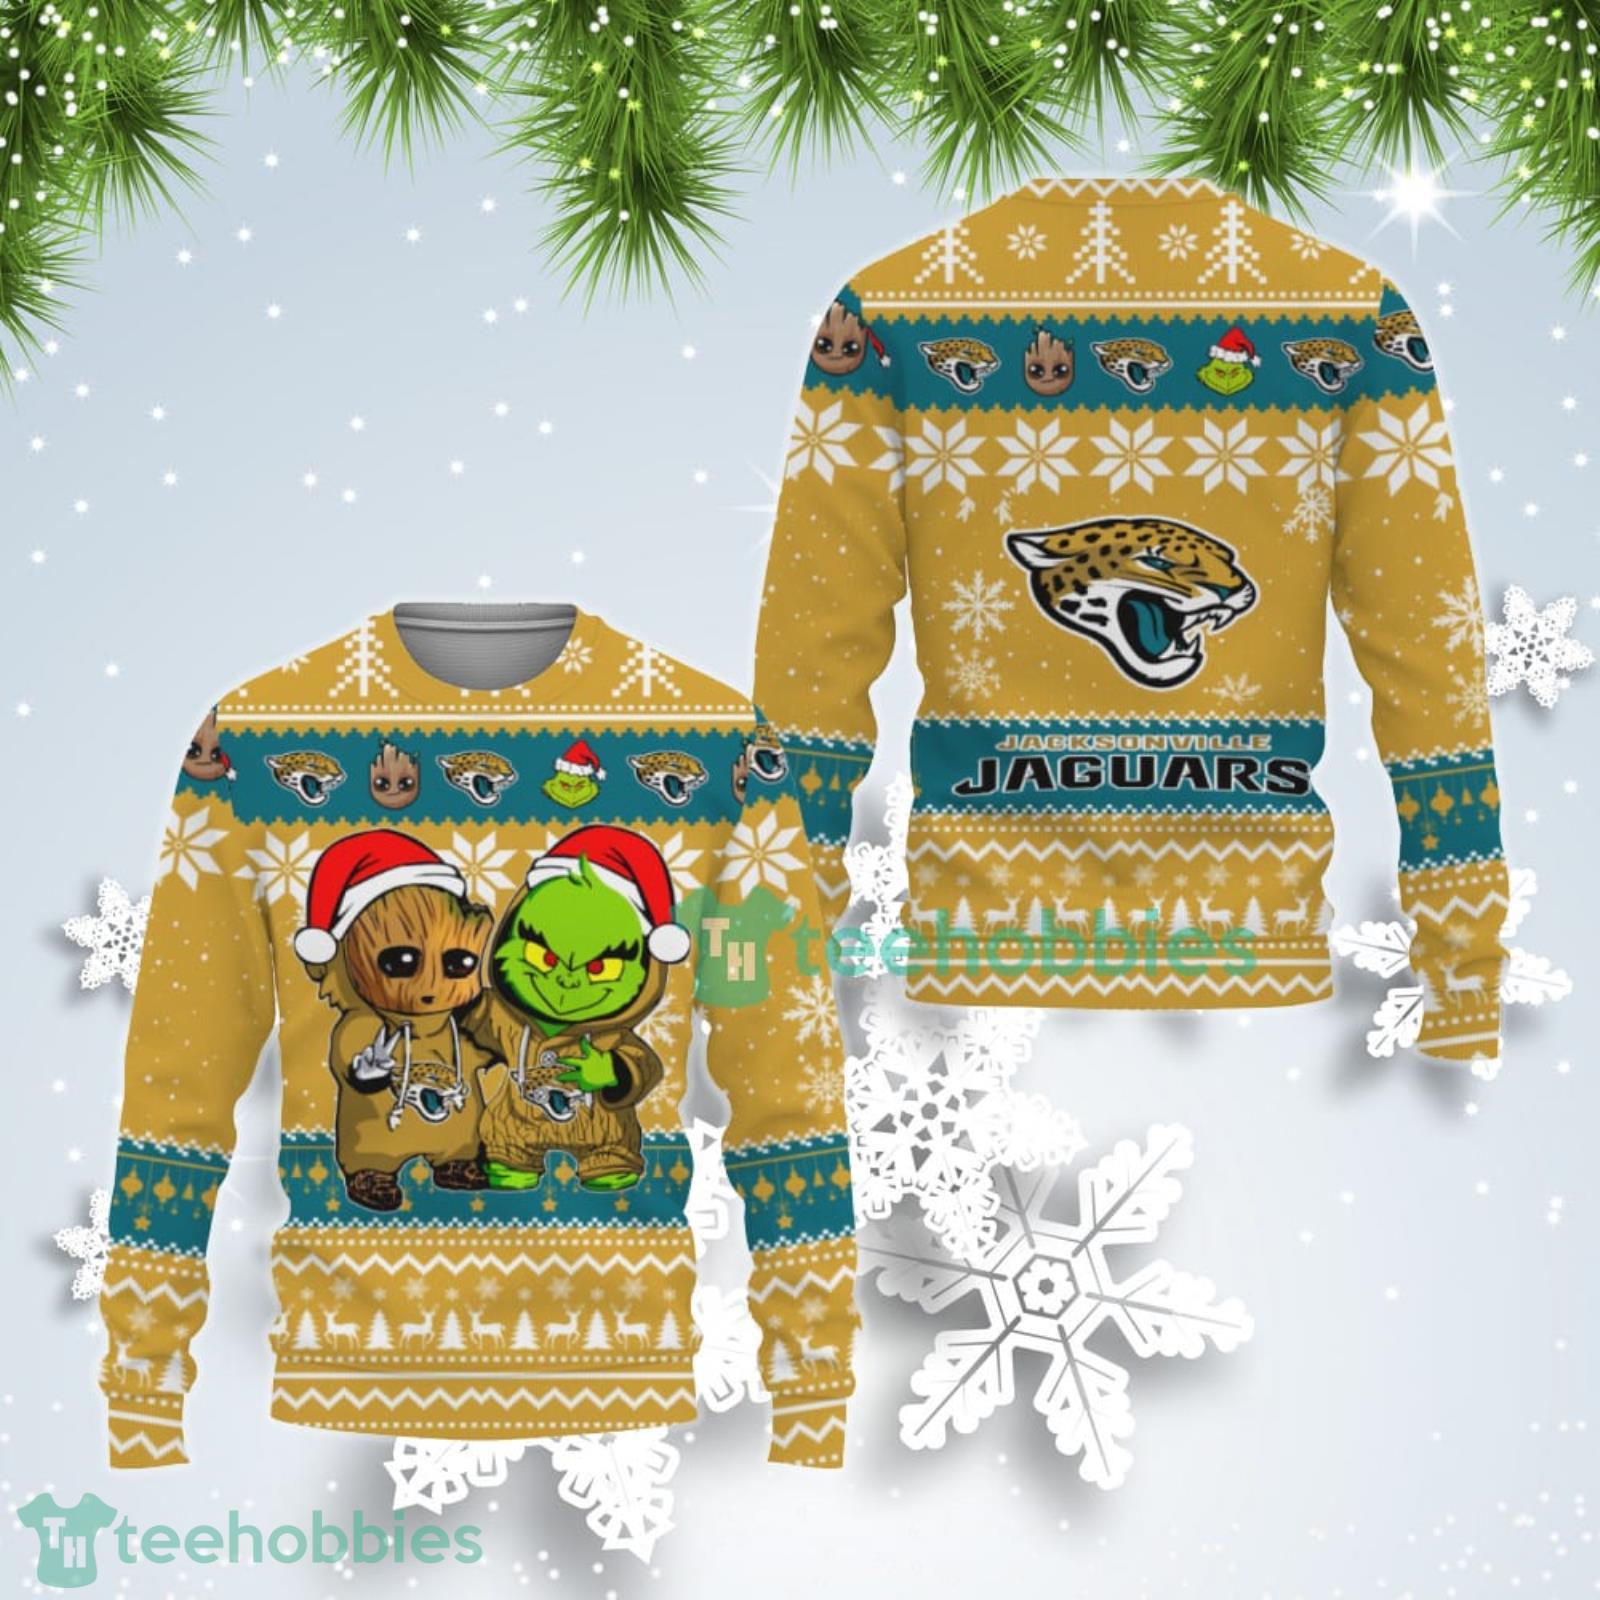 Jacksonville Jaguars Baby Groot And Grinch Best Friends Ugly Christmas Sweater Product Photo 1